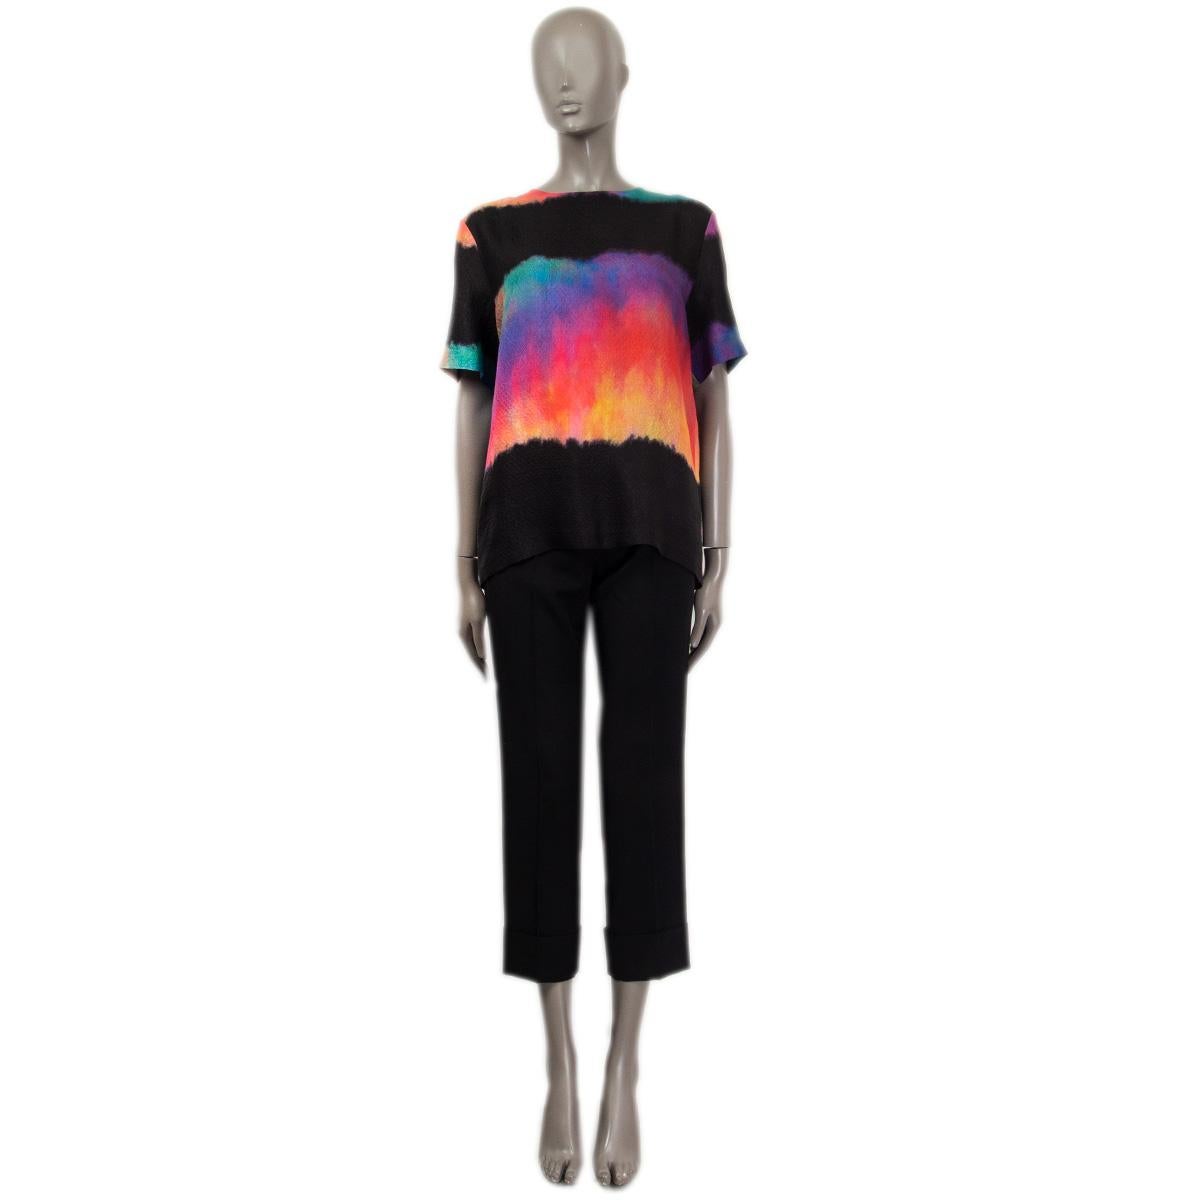 100% authentic Chanel short sleeve shift silk blouse in black, orange, green, purple, pink tie-dye silk (100%). Metiers d'Art 2019/20. Closes with four metal buttons which are embellished with a lions head on the back. Comes with an additional